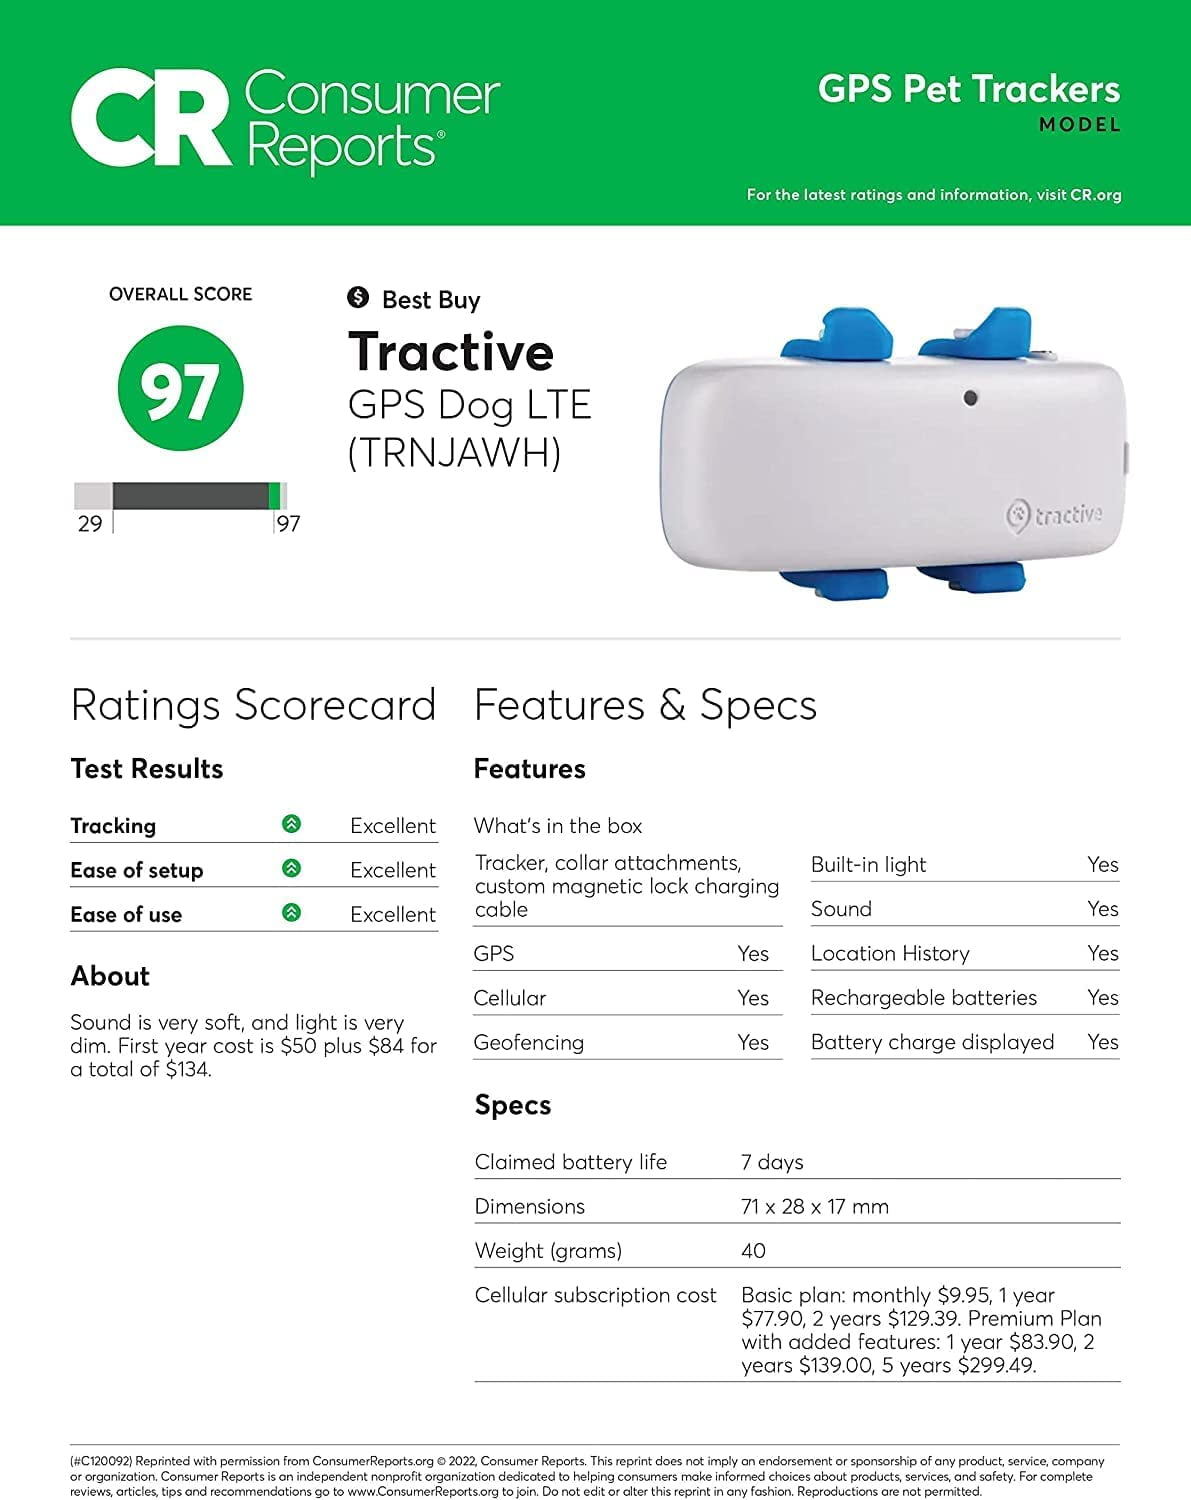 Tractive Dog GPS Tracker with Activity Monitoring, Fits any Collar (White)  